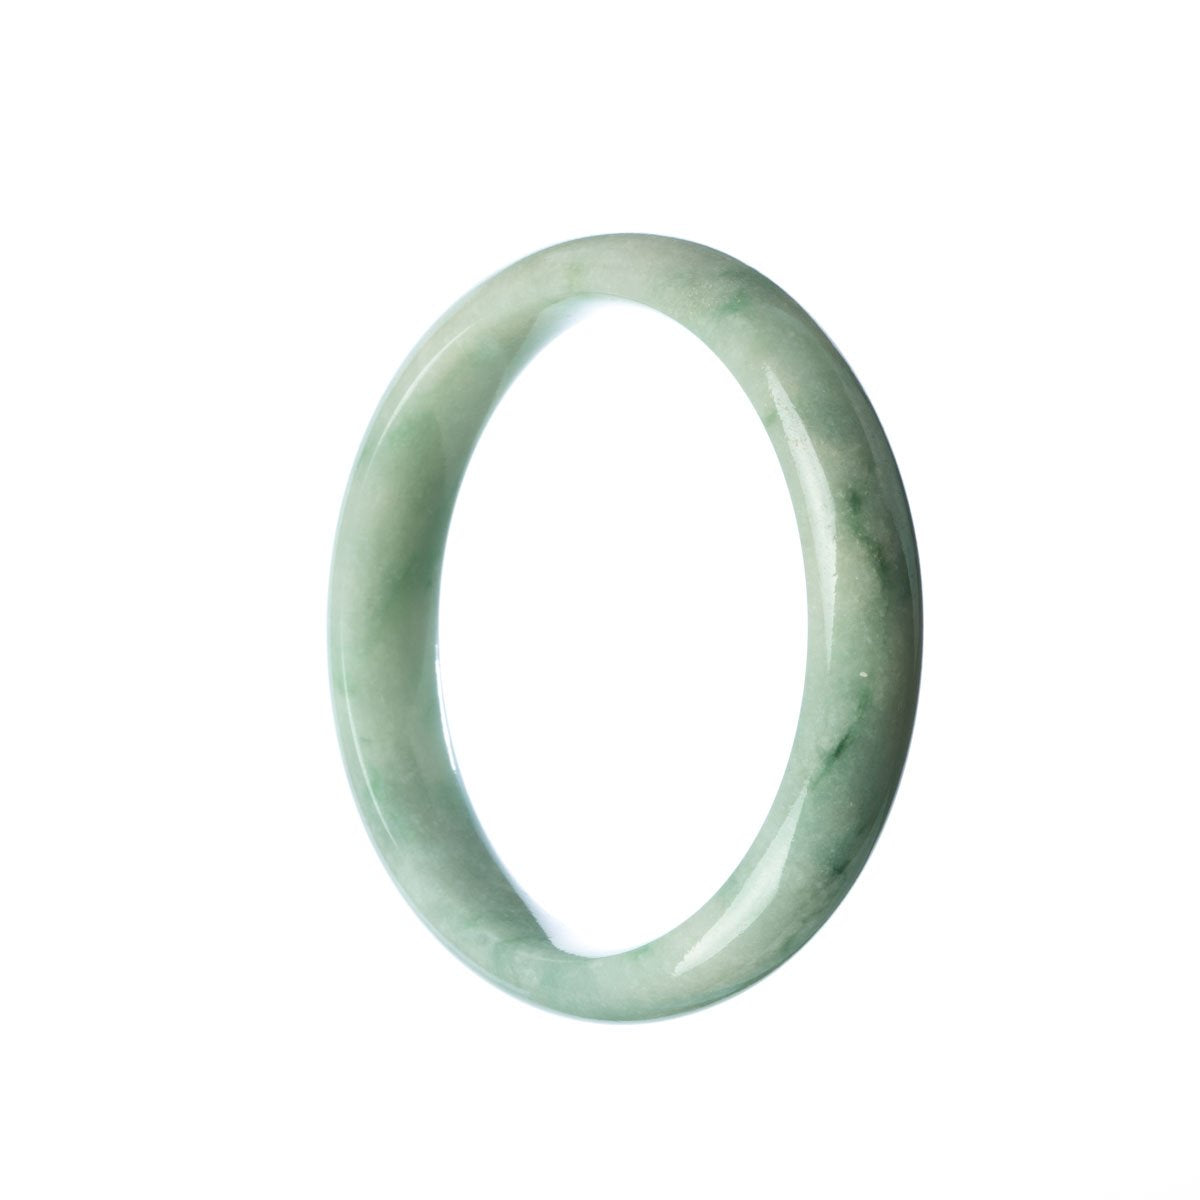 A close-up photo of a pale green Burmese jade bangle bracelet, 57mm in size, shaped like a half moon. The bracelet is untreated, showcasing its natural beauty.